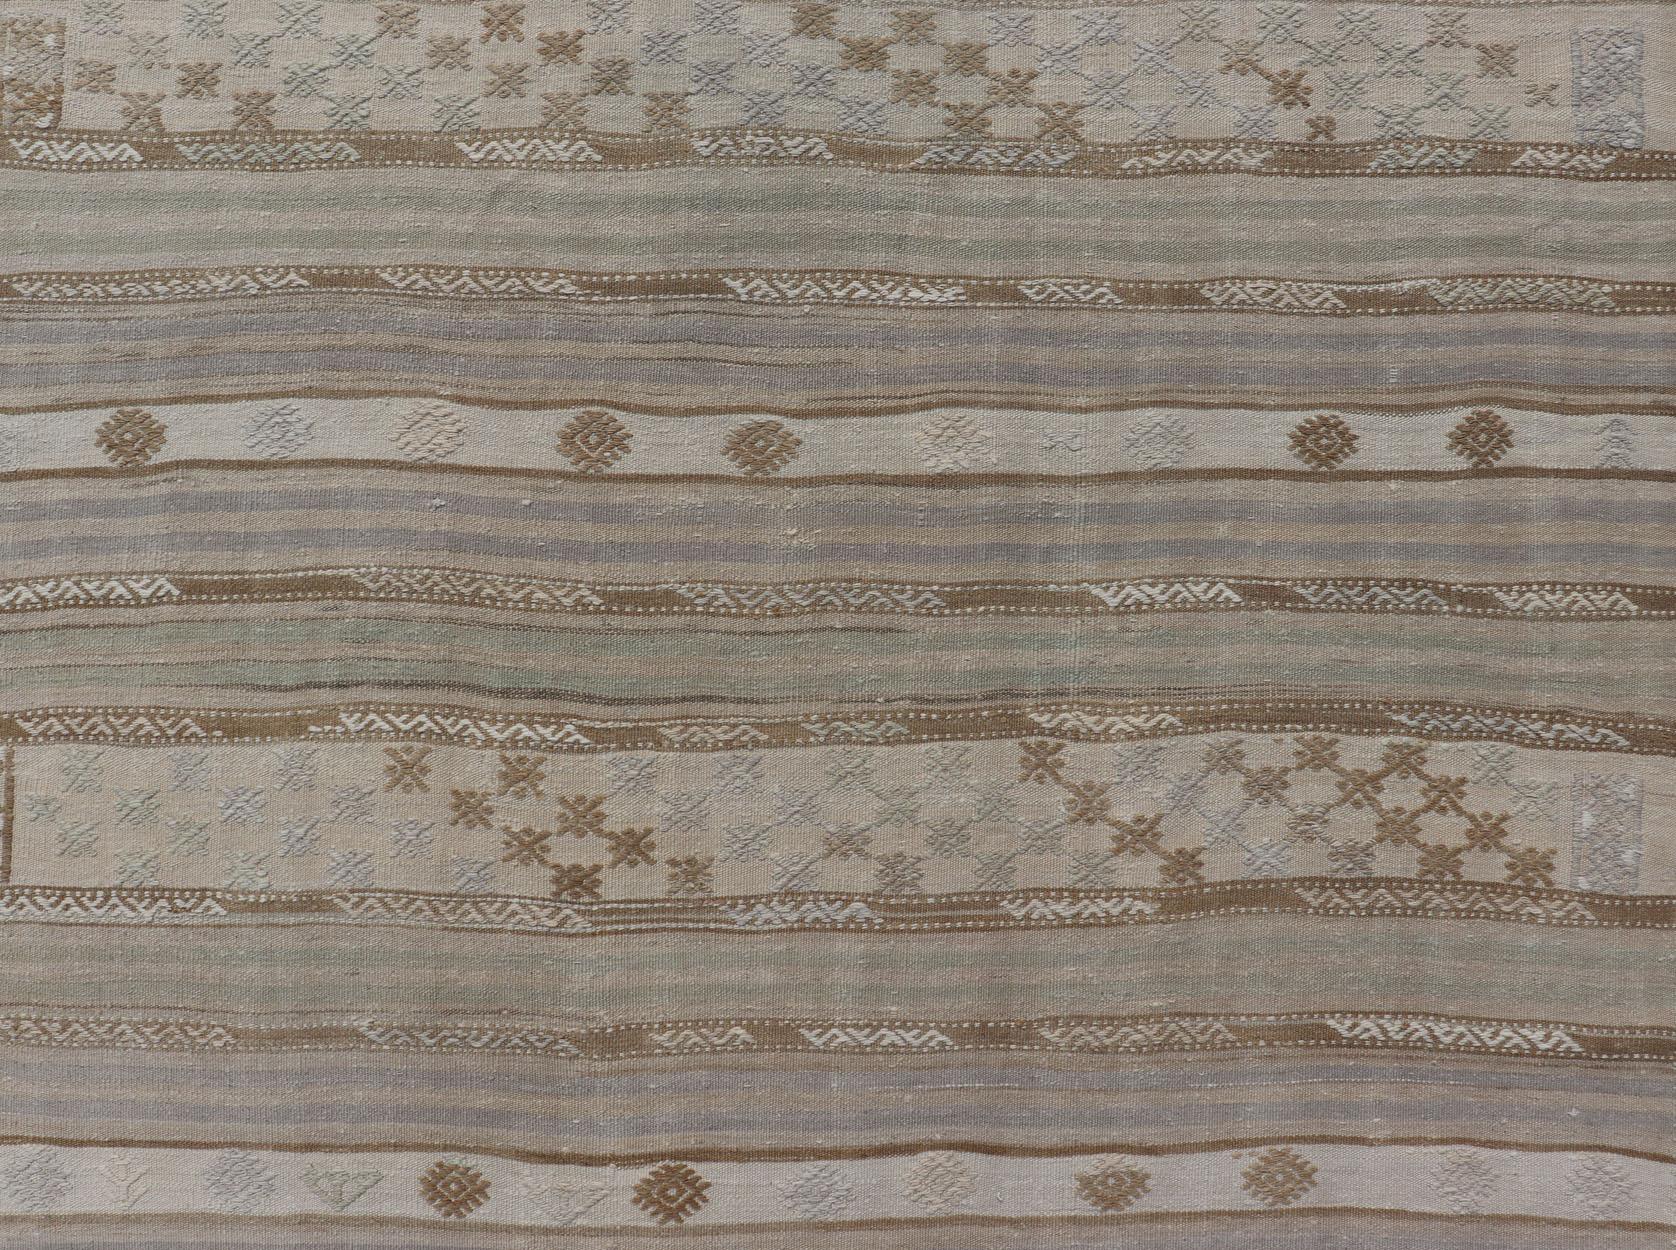 Striped Turkish Flat-Weave Kilim in Muted Colors and Tribal Motifs For Sale 4